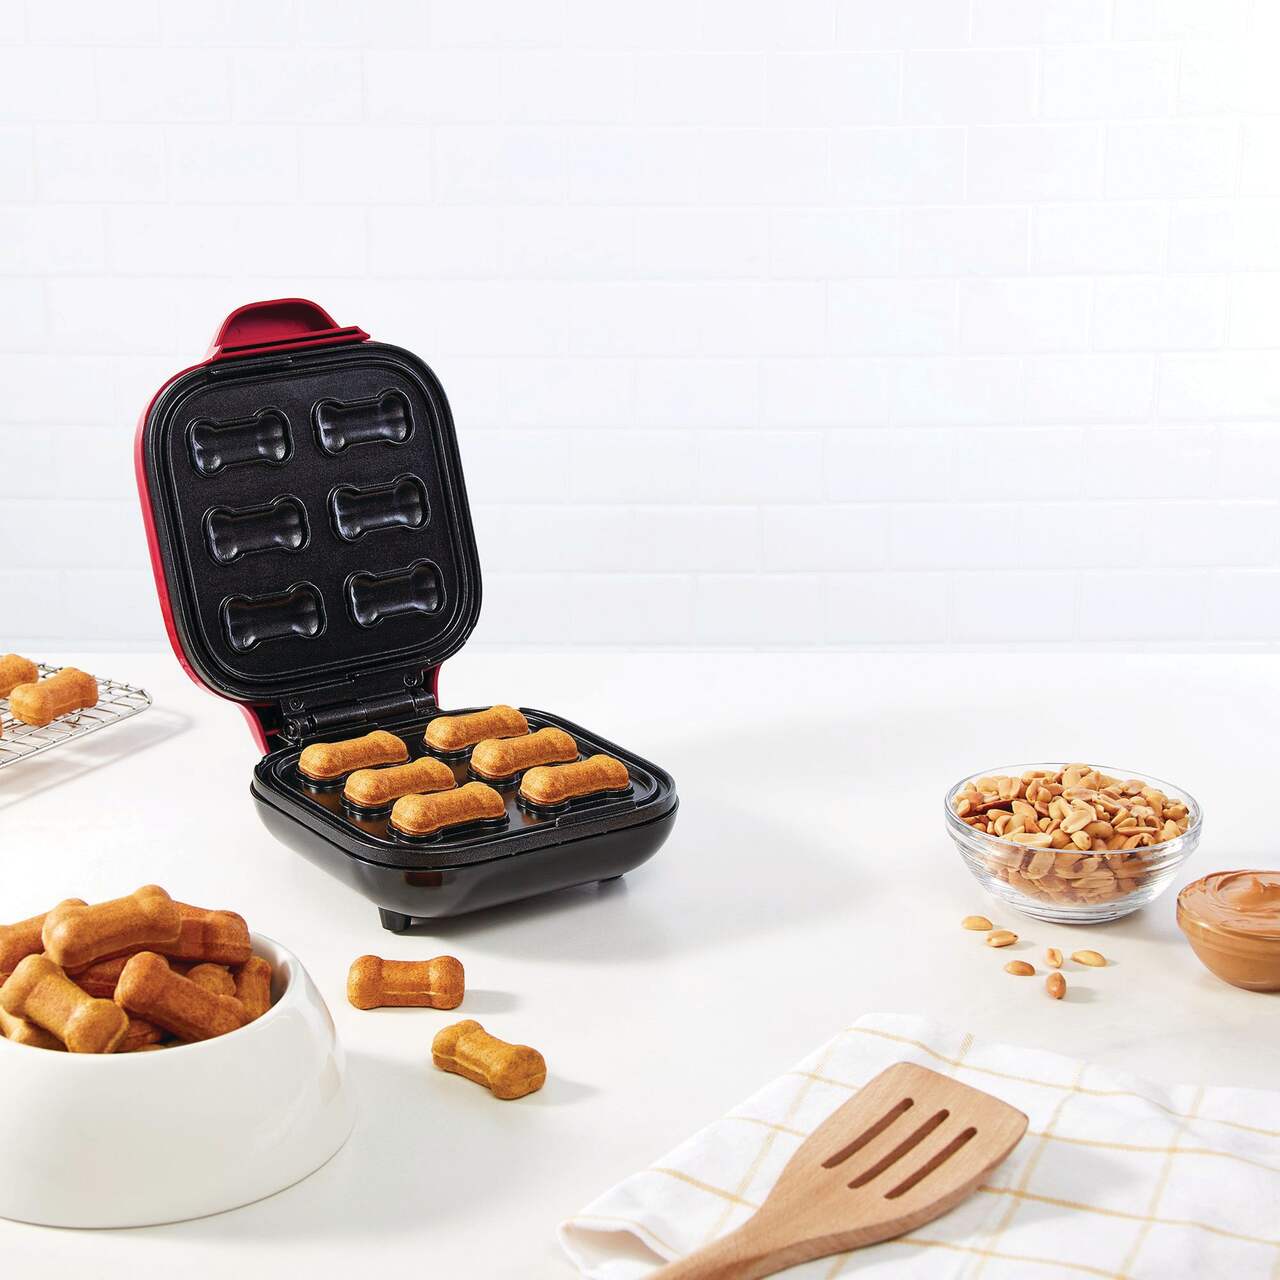 https://media-www.canadiantire.ca/product/living/kitchen/kitchen-appliances/4991129/dash-dog-treat-maker-4c9a436e-6fec-453d-bd17-e44d356664f7-jpgrendition.jpg?imdensity=1&imwidth=1244&impolicy=mZoom